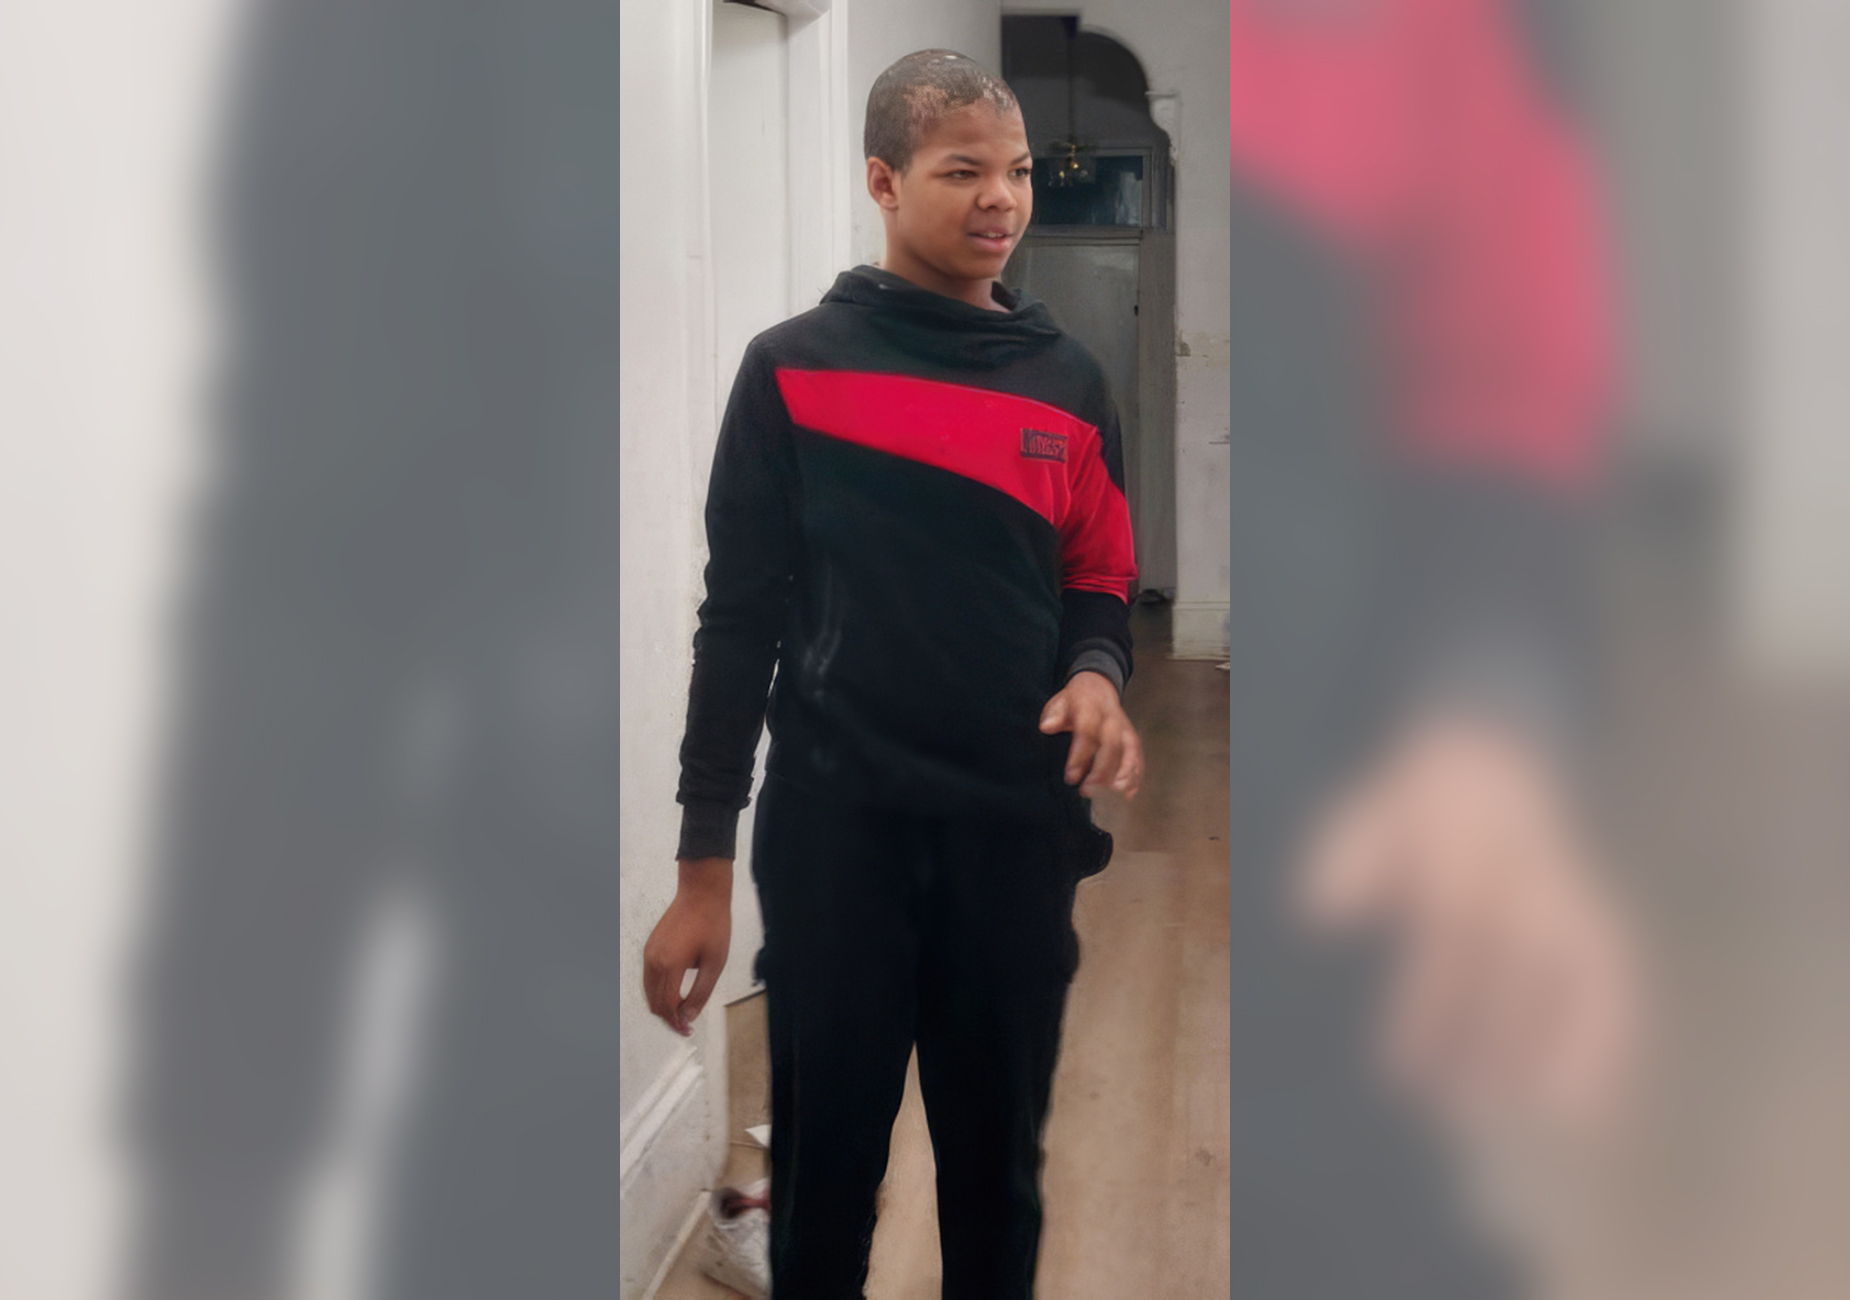 San Francisco Police Department is asking for help locating Knowledge Shepard, who was last seen entering the Embarcadero BART Station around 7 p.m. Friday.